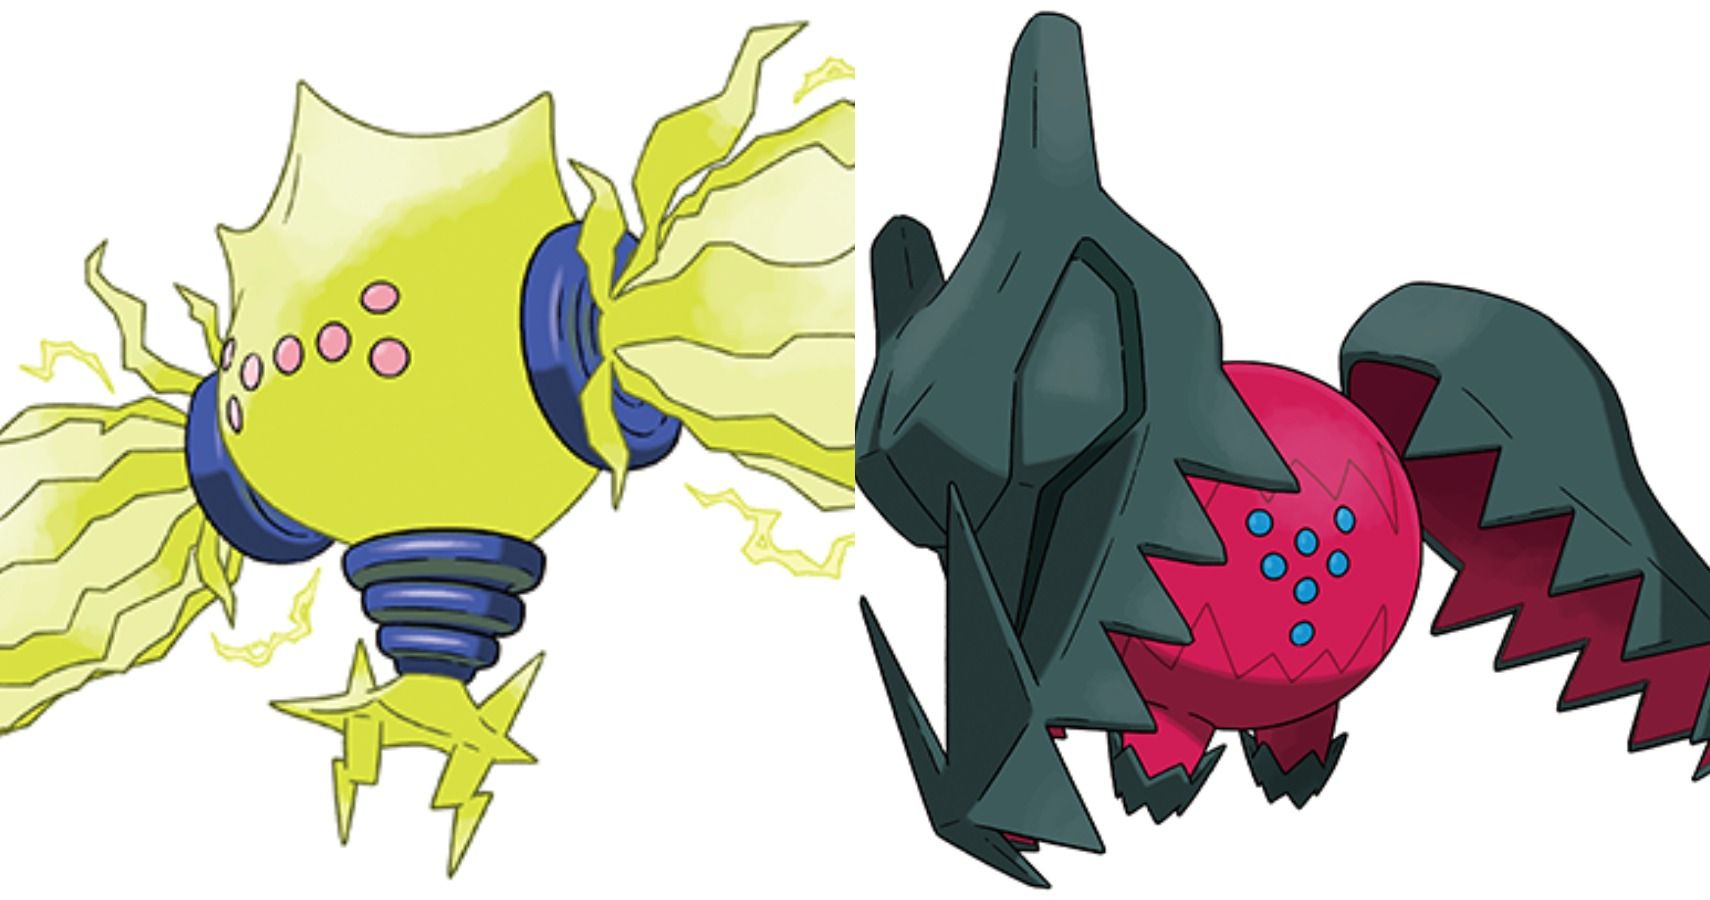 Two New Regis Are Coming In The Crown Tundra DLC For PokÃ©mon Sword.